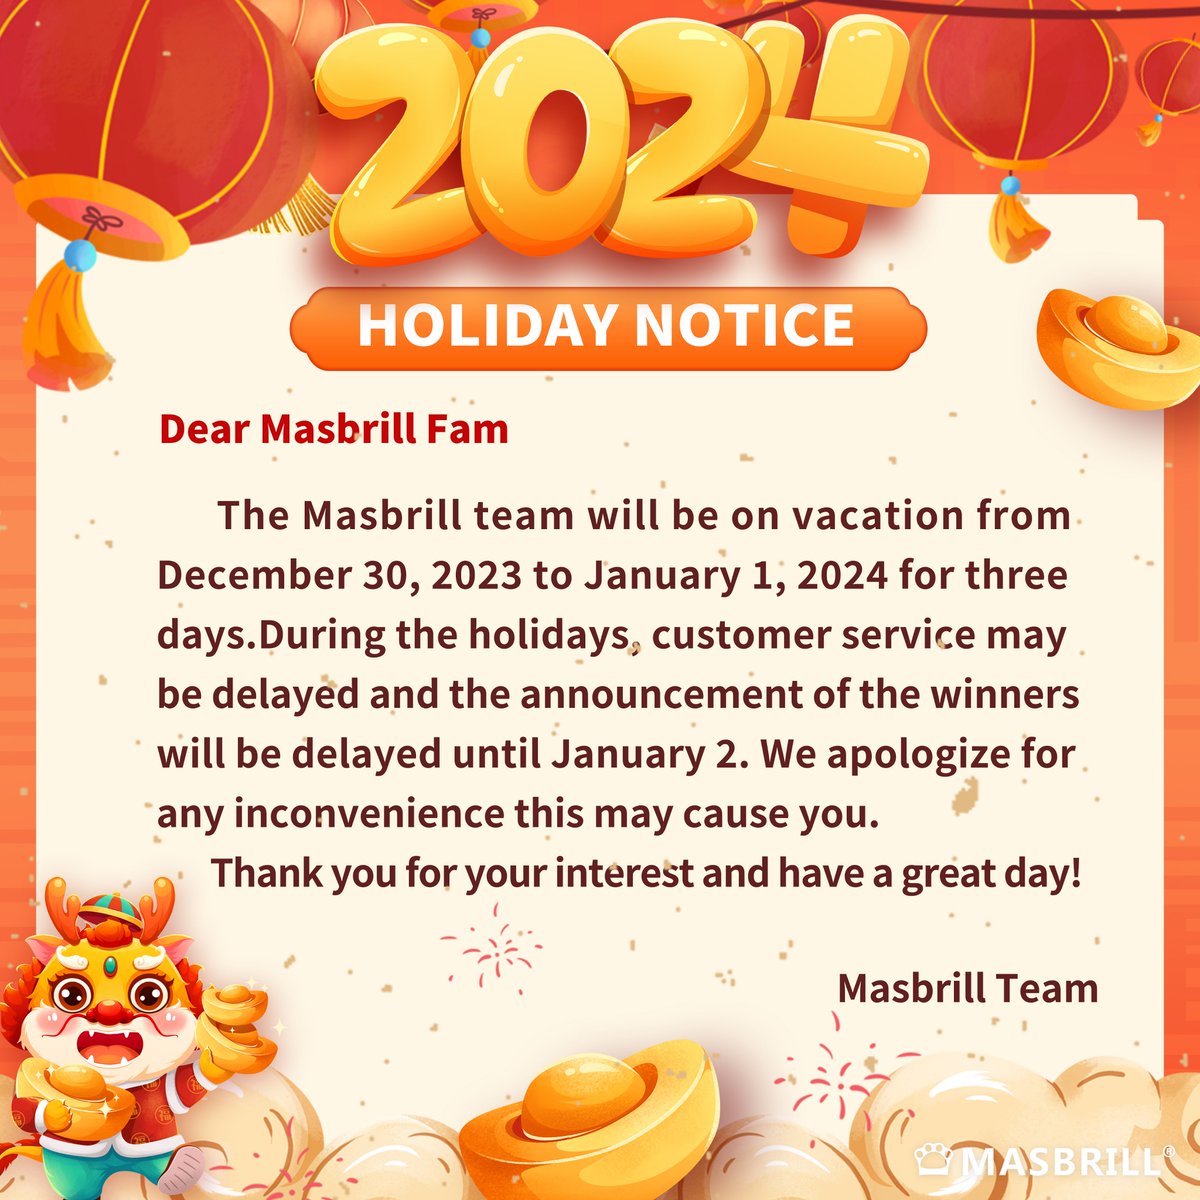 🟥Holiday Notice🟥
masbrill.us
#dog #christmastime #Giveaway #WinPrizes  #ChristmasGifts #ChristmasFun #DogLovers #GiftsForPets #PetToys #christmasgiveaway #ChristmasCelebration #PetAccessories #EnterNow #dogs #dogslove #merrychristmas2023 #christmaseve #holiday #gift